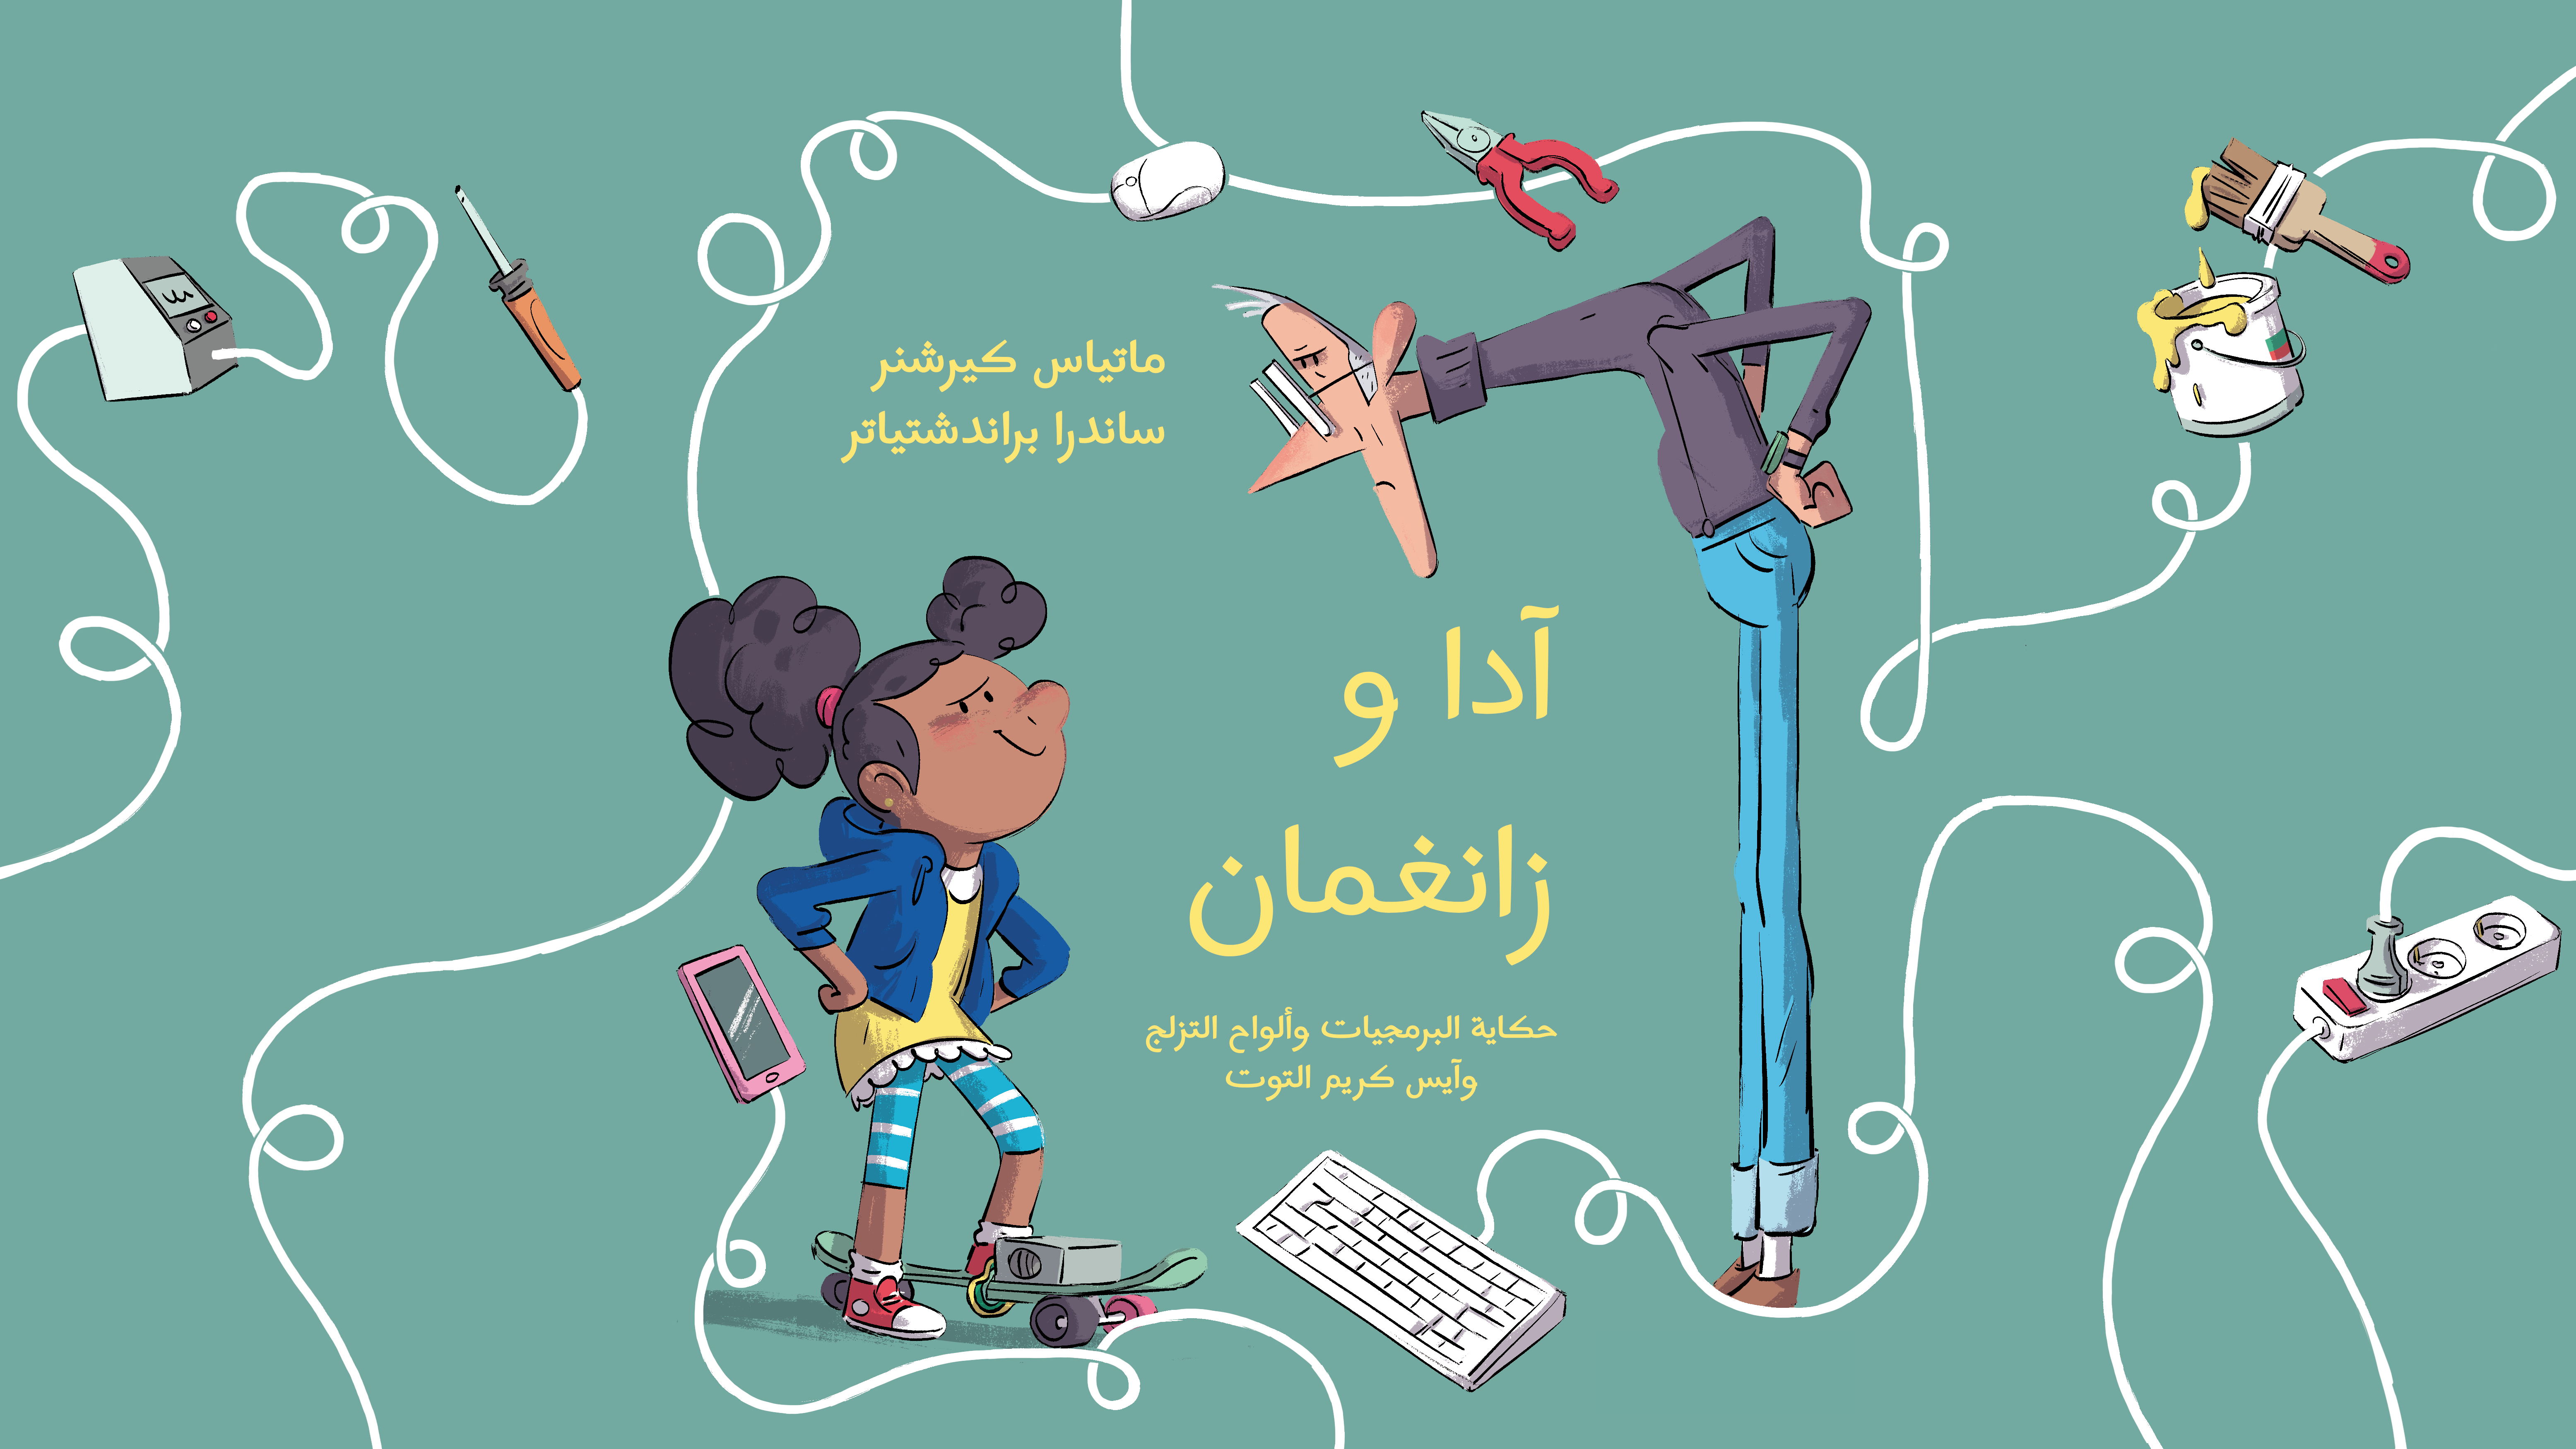 16:9 version of the Arabic book cover